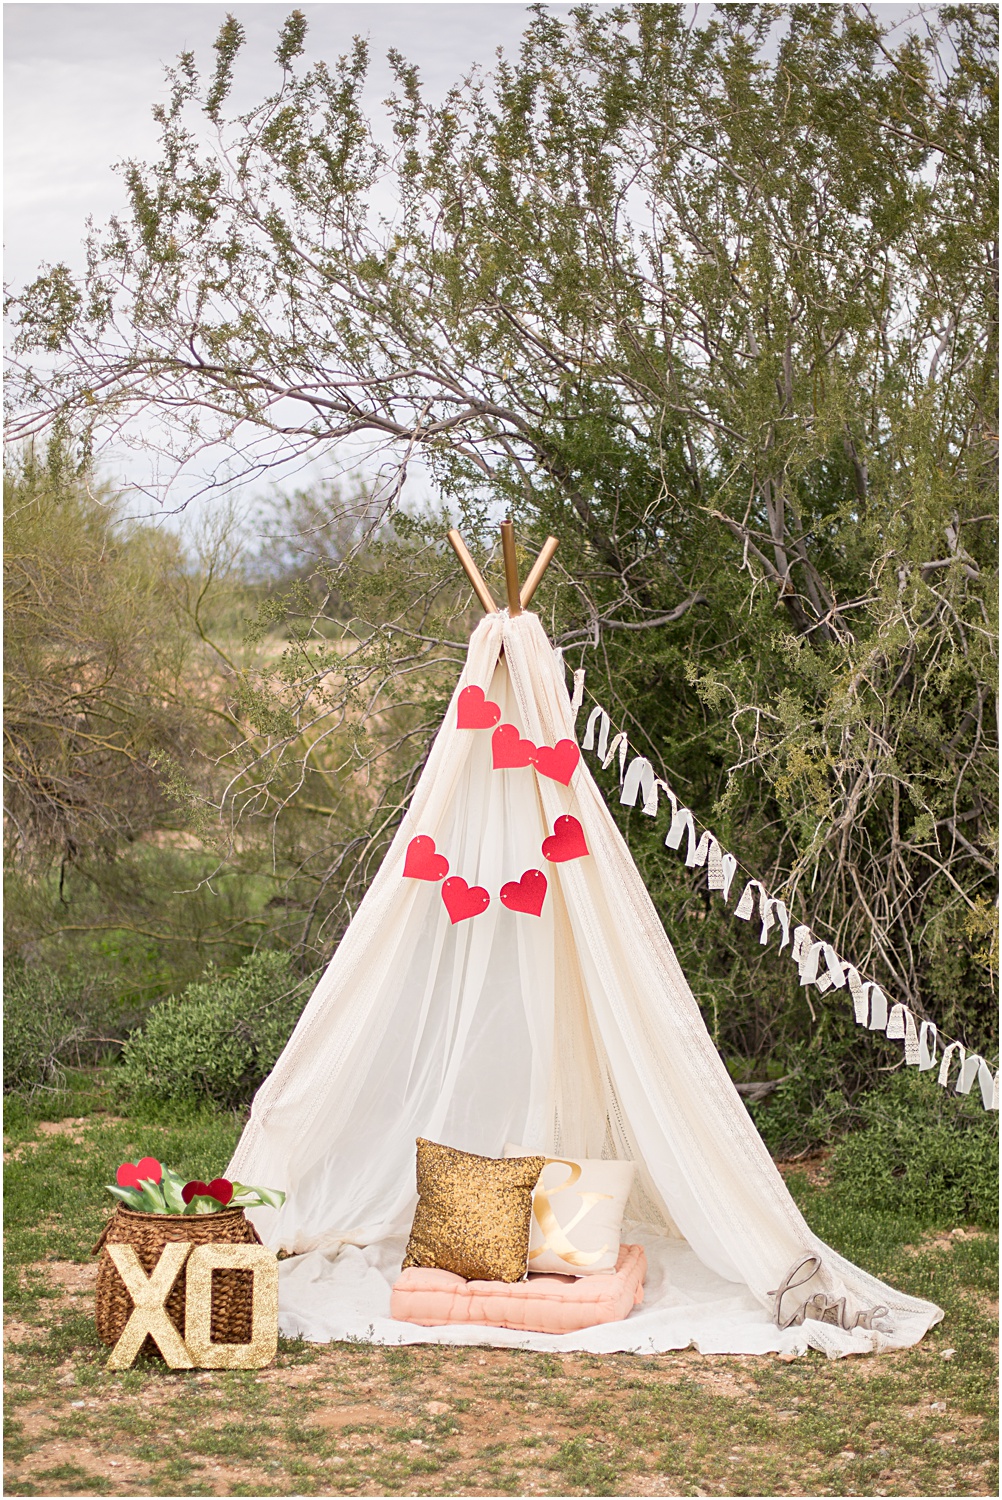 Photography by Aubrey Rae | Valentine's mini session, simple yet elegant kids themed styled shoot. Whimsical teepee setup with Valentine's day decorations. 